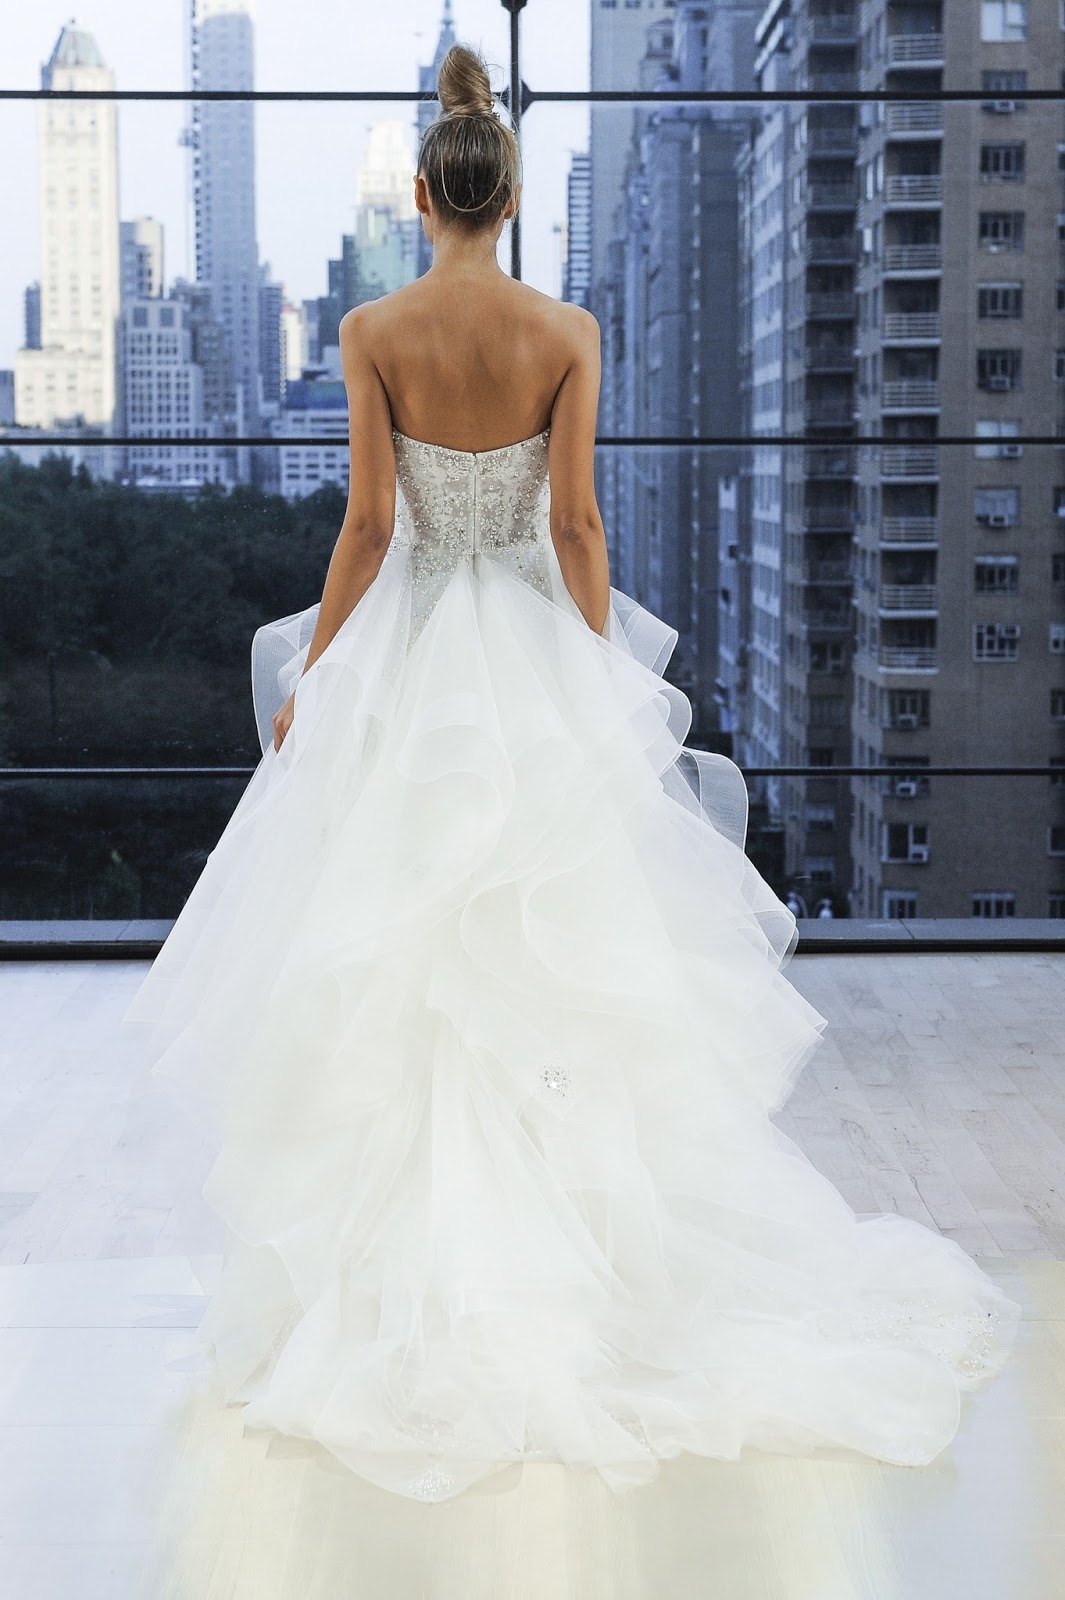 Wedding Gown Glamour: INES DI SANTO